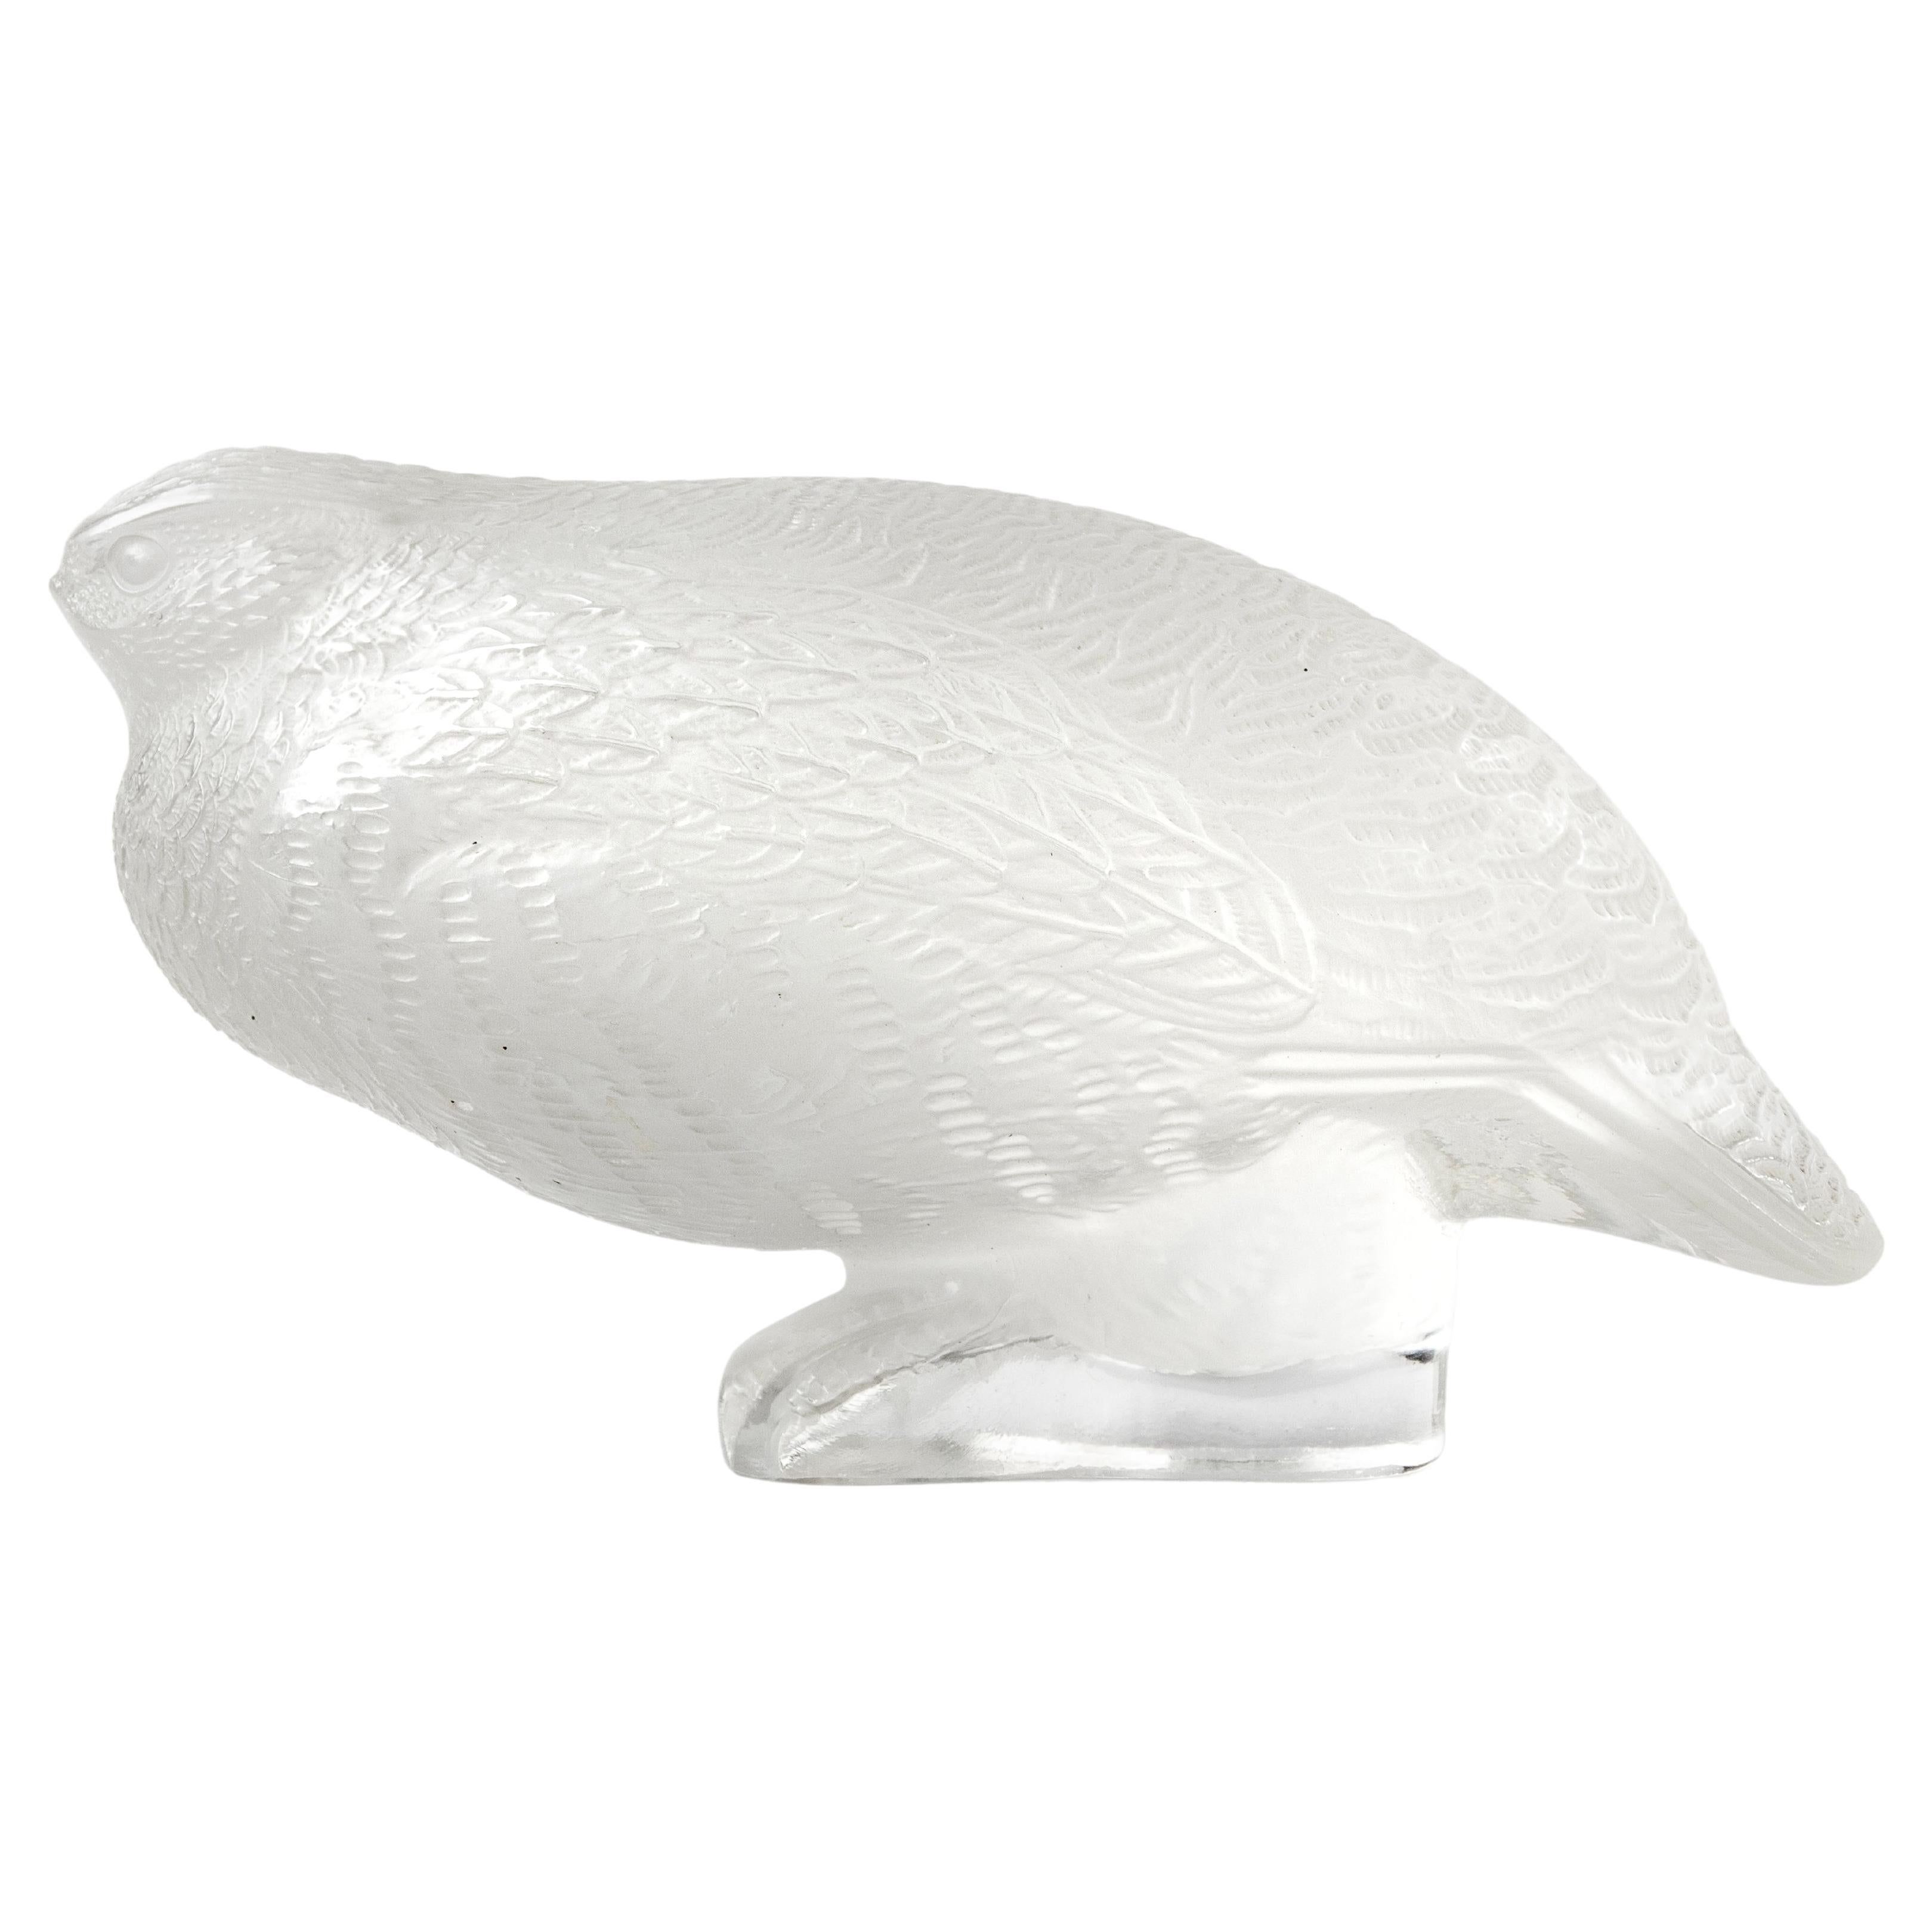 Mid-Century Modern Crystal Paperweight / Figurine of a Quail Bird, Lalique For Sale